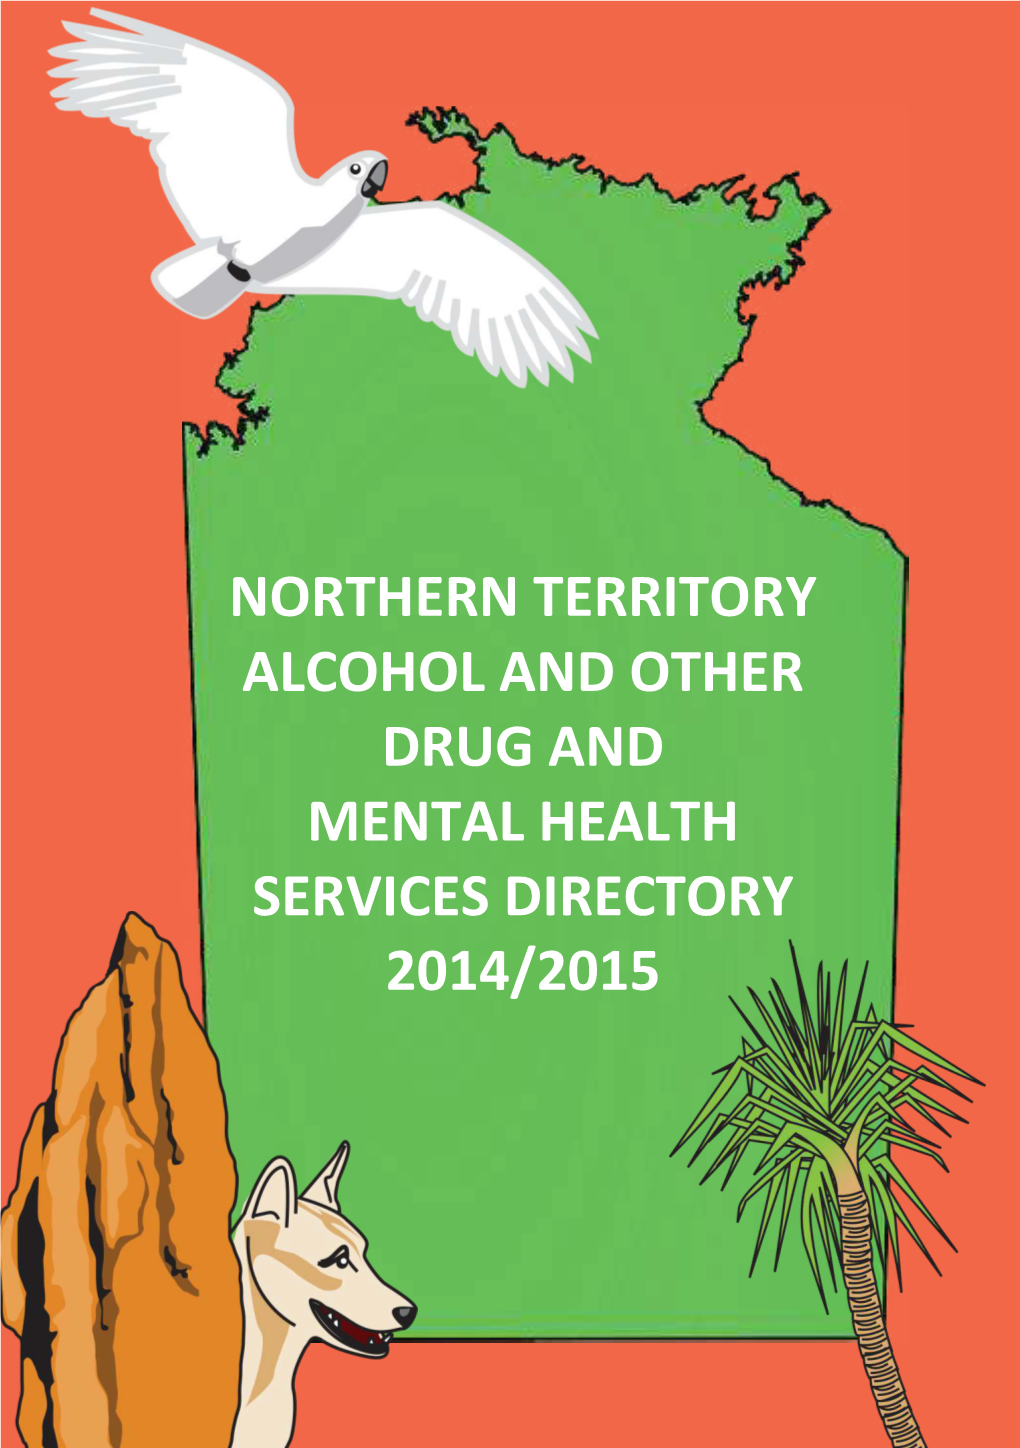 Northern Territory Alcohol and Other Drug and Mental Health Services Directory 2014/2015